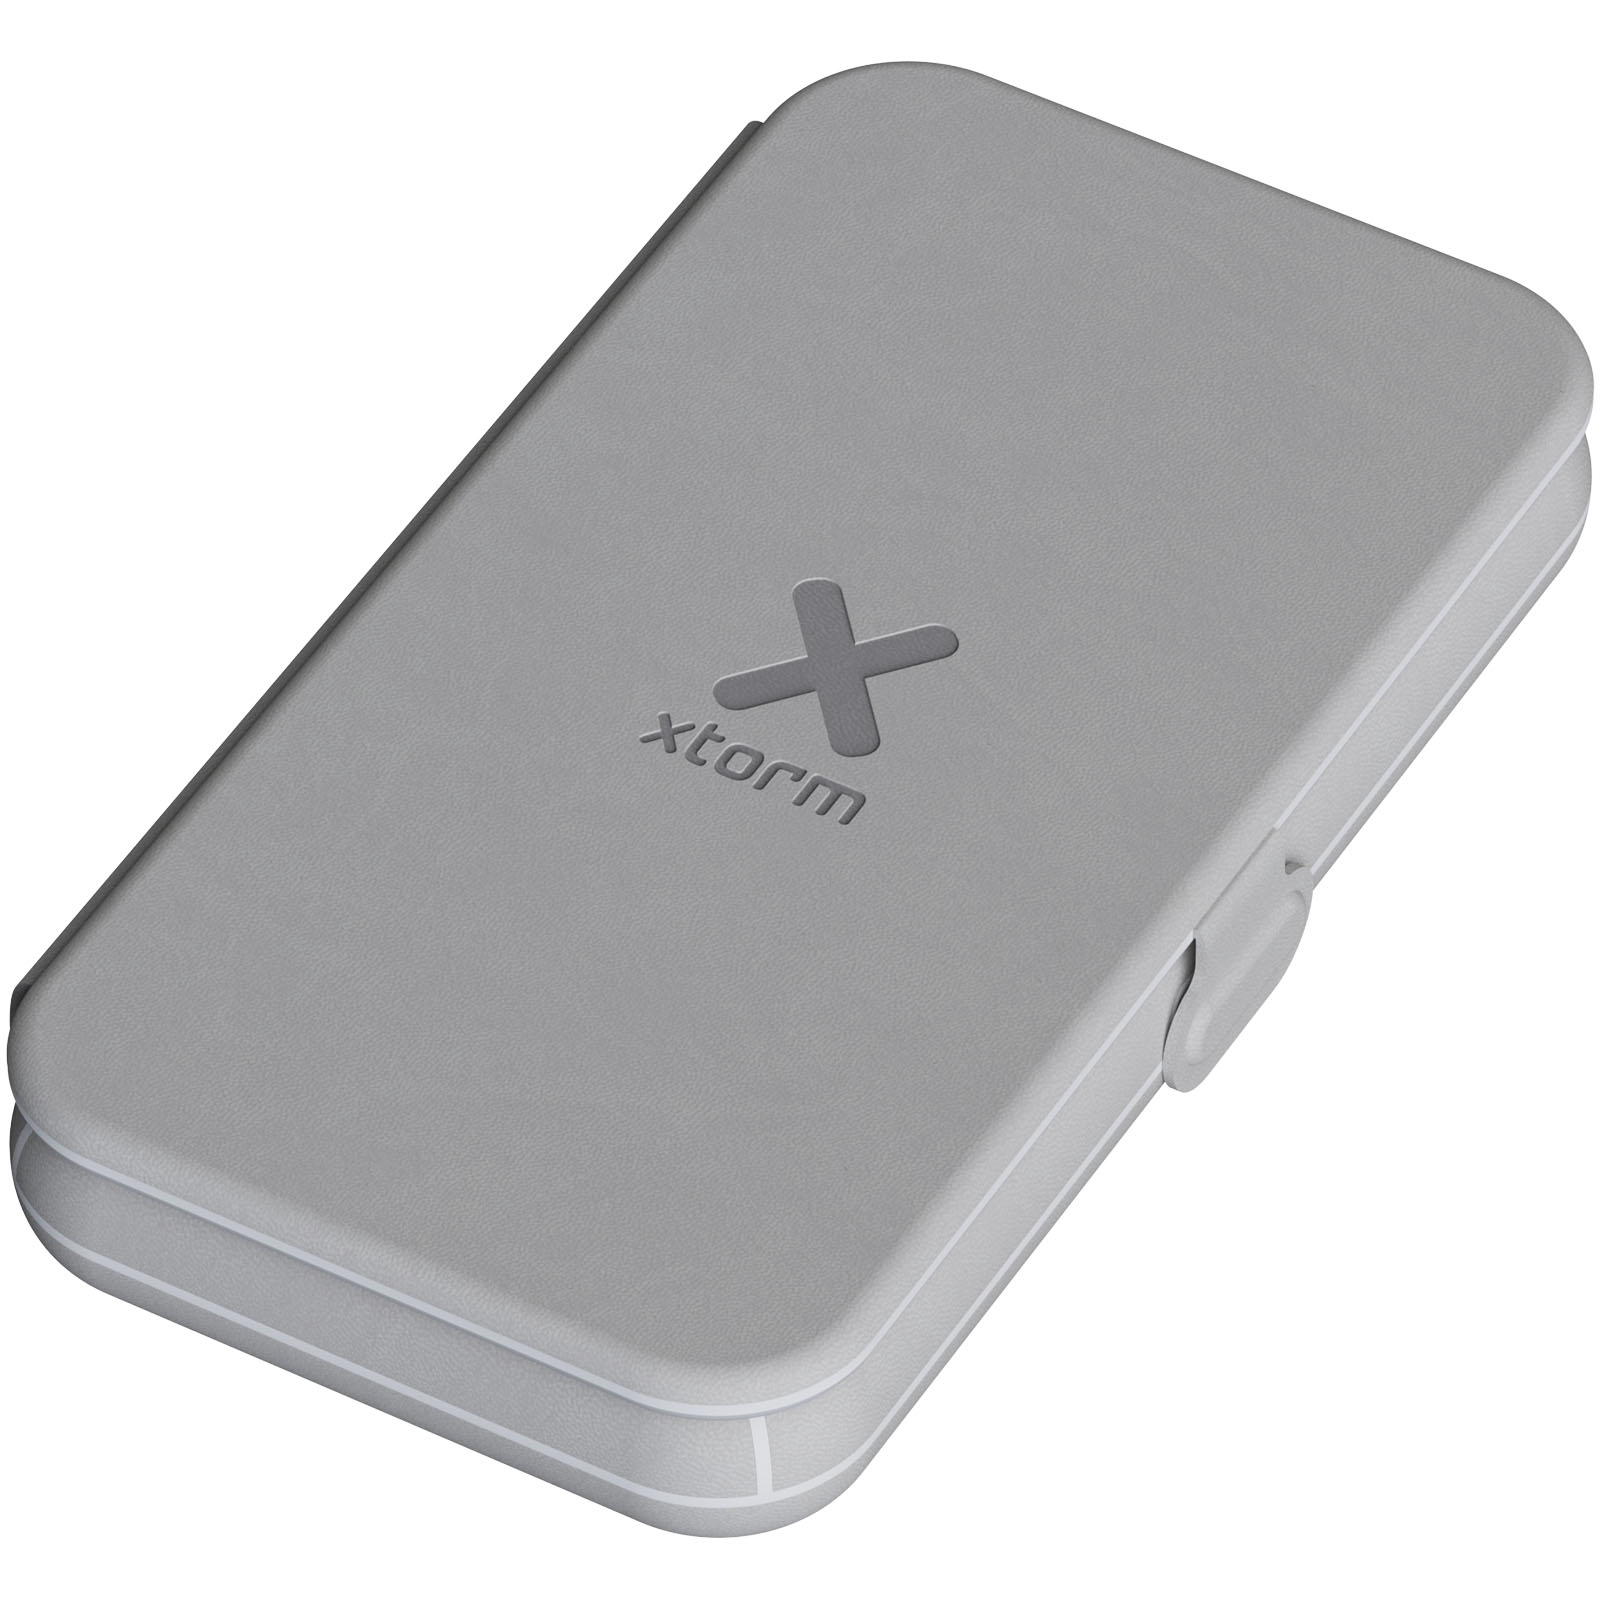 Technology - Xtorm XWF31 15W foldable 3-in-1 wireless travel charger